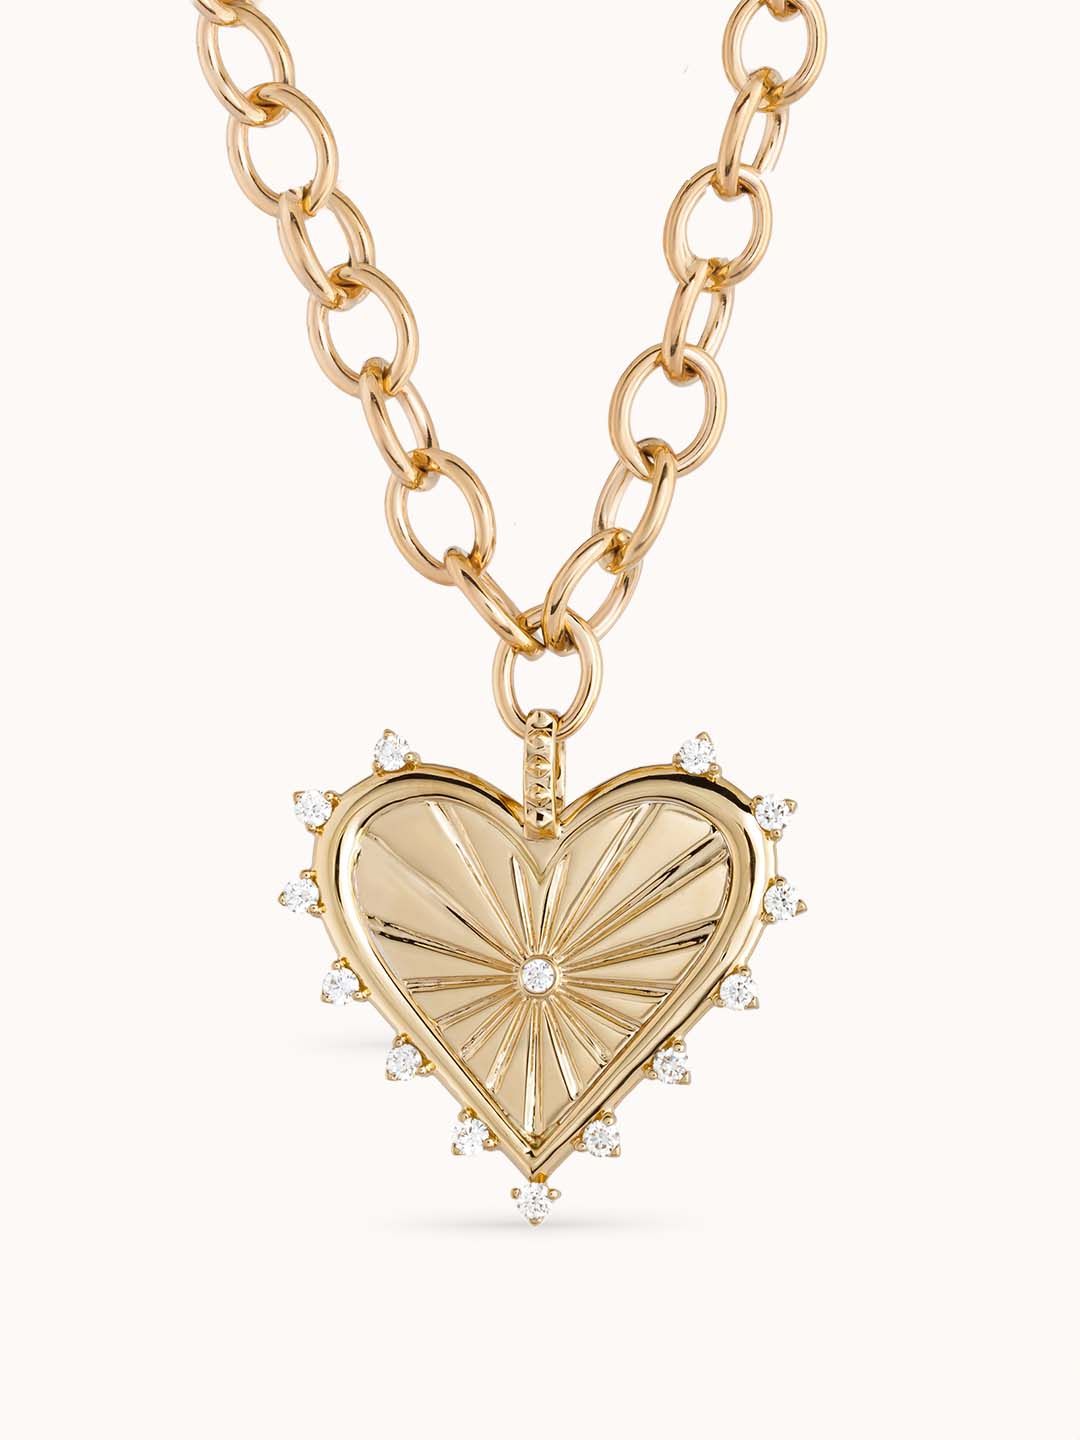 Brado Jewellery Multi Wearing Heart Necklace 4 Heart Magnetic Rose Gold Necklace  Pendant Heart Toggle Necklace Diamond Women/Girls Accessories : Amazon.in:  Fashion